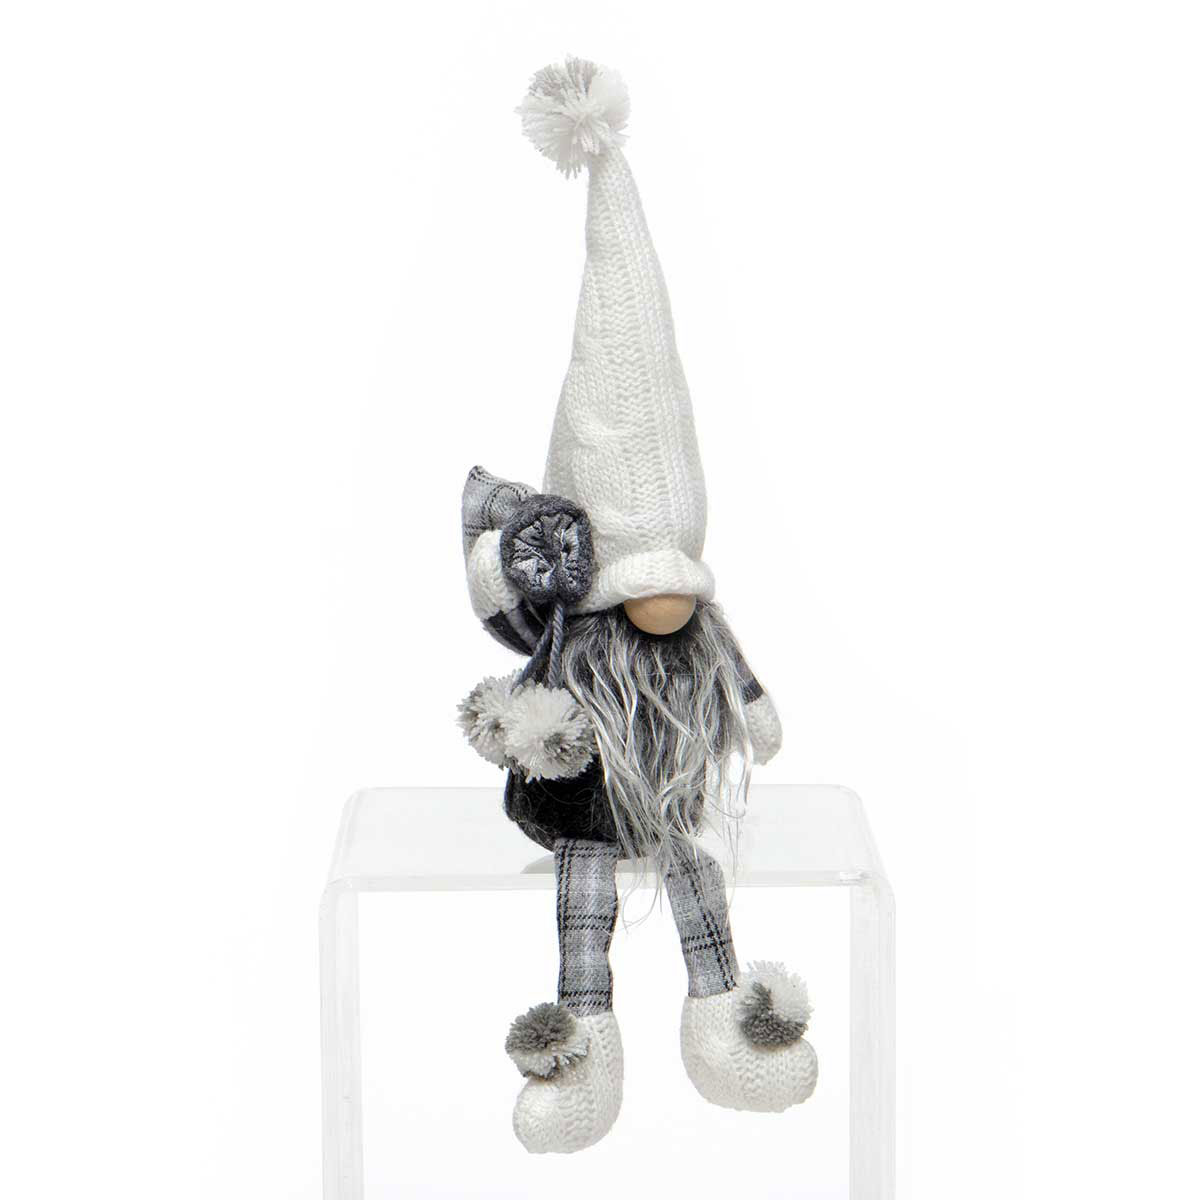 POM-POM GNOME GREY/CREAM WITH PLAID BAG, WIRED CABLE KNIT